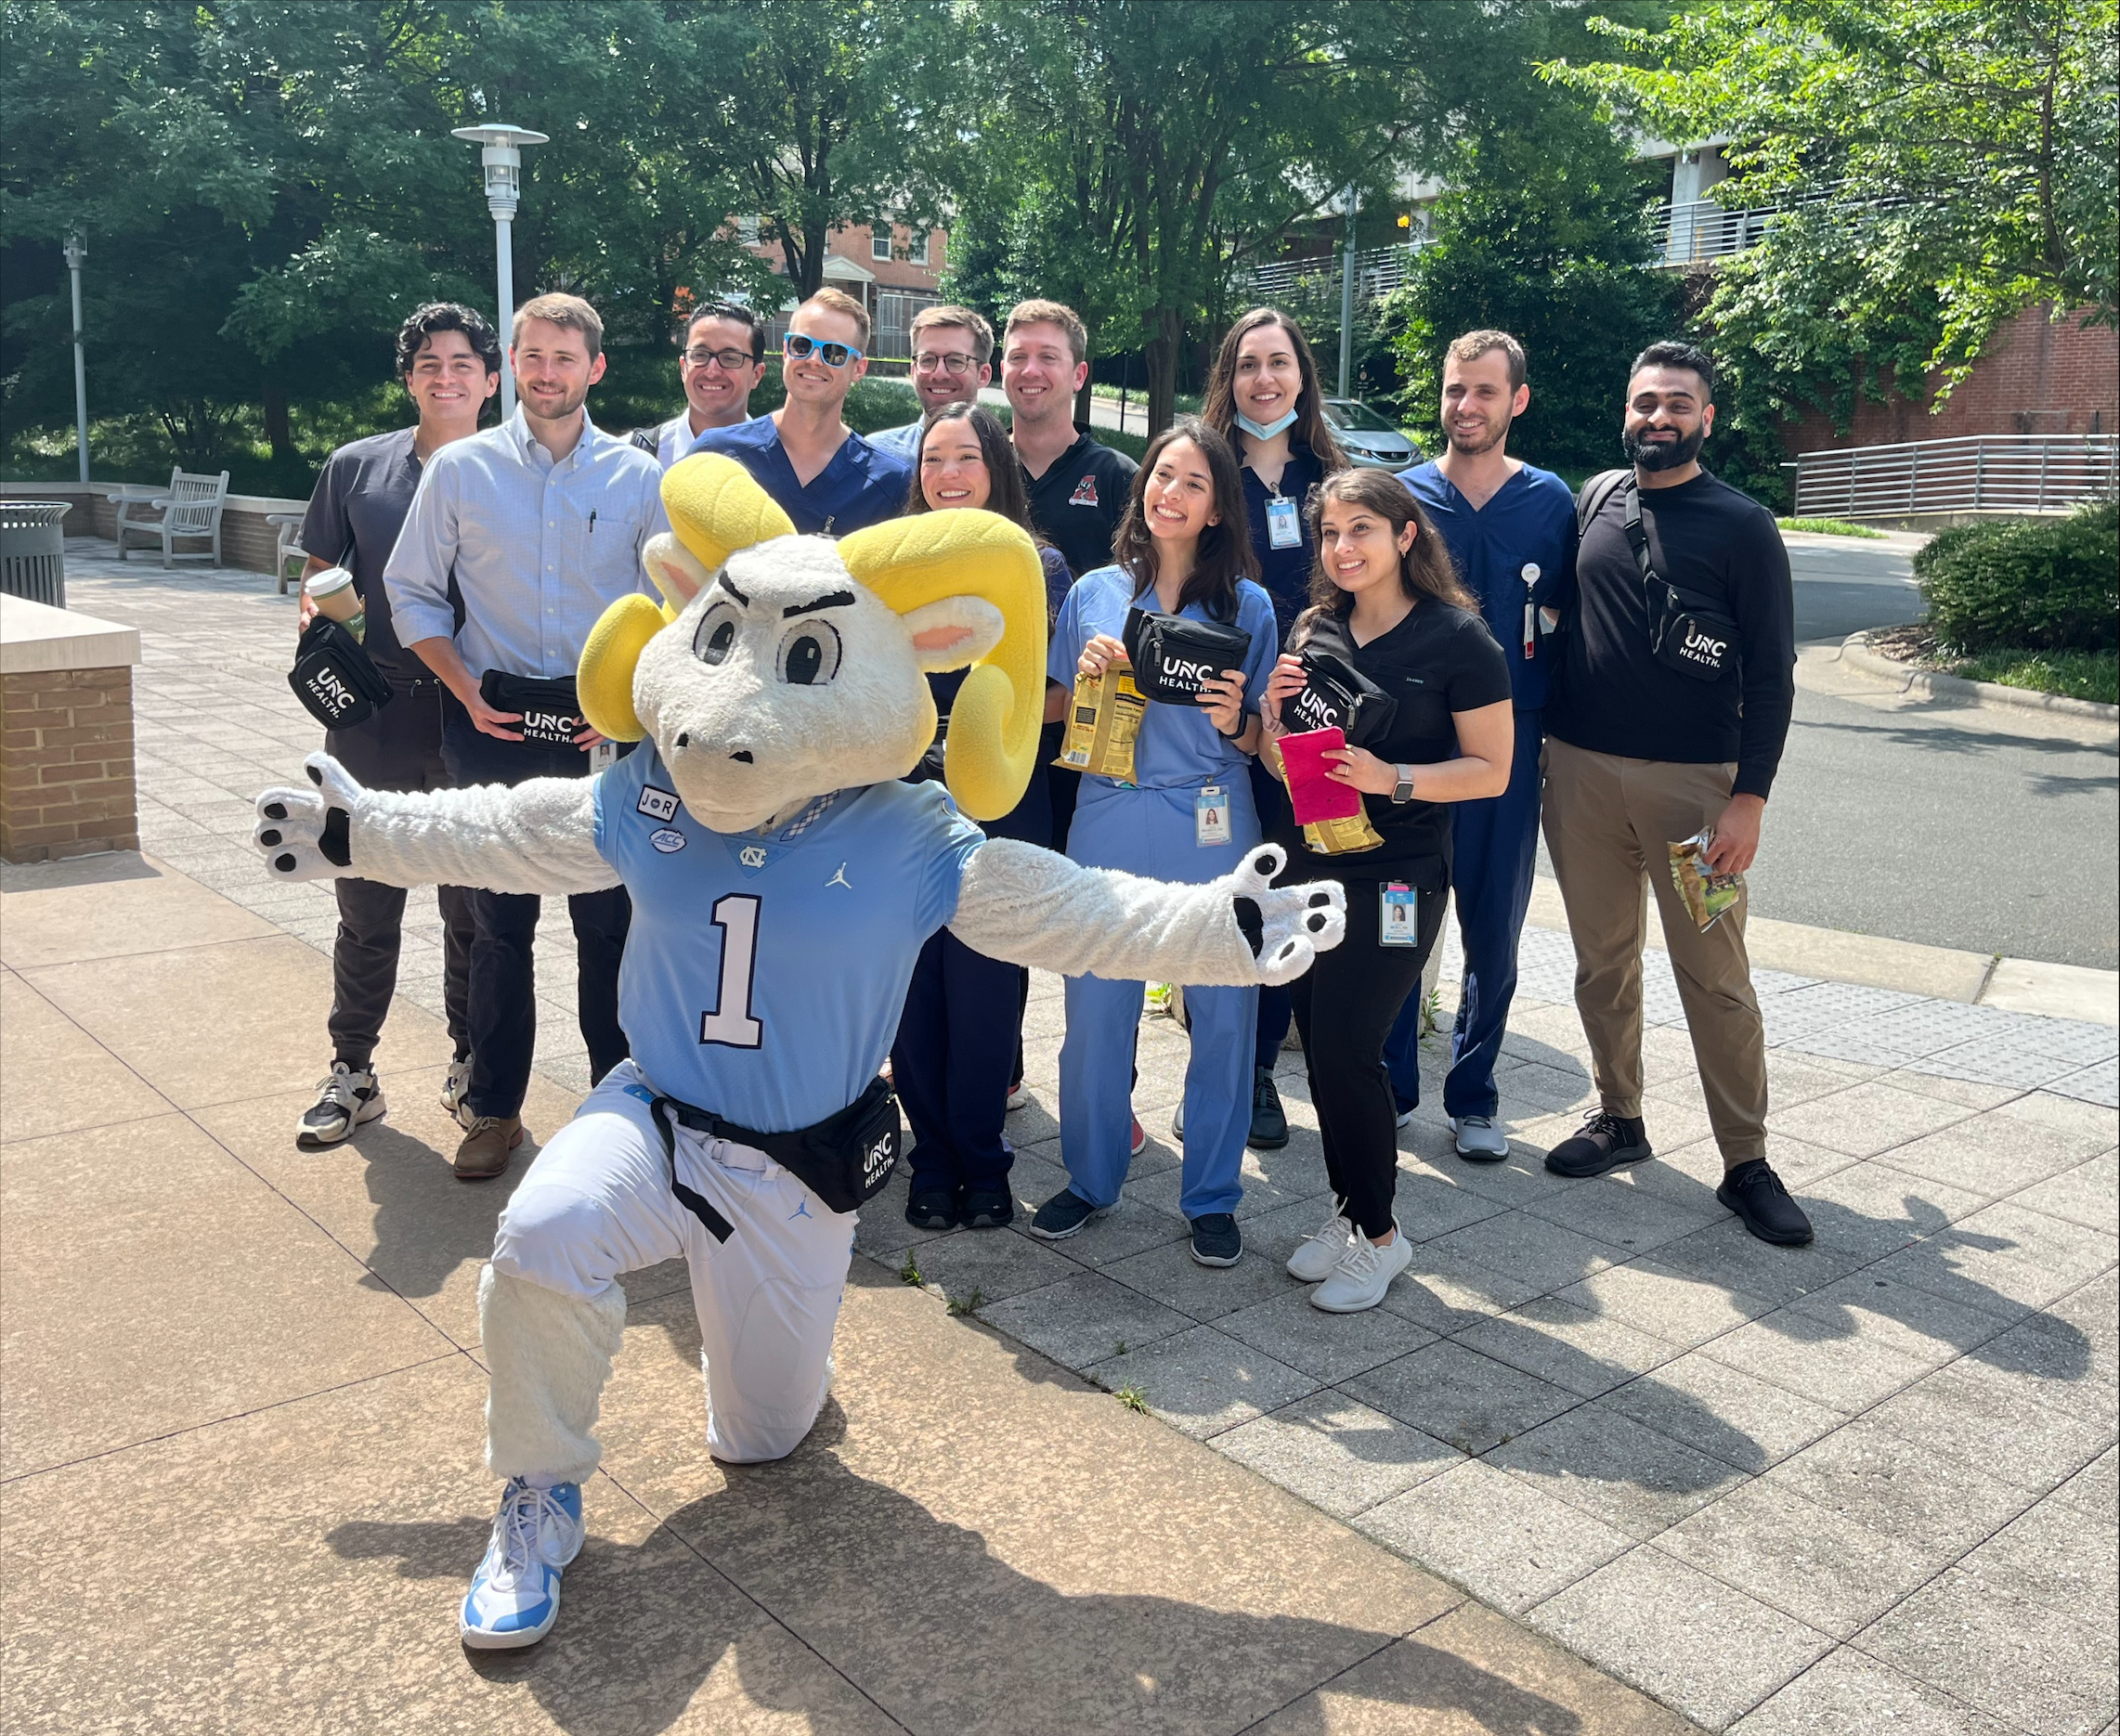 new residents and fellows with the unc mascot ramsy